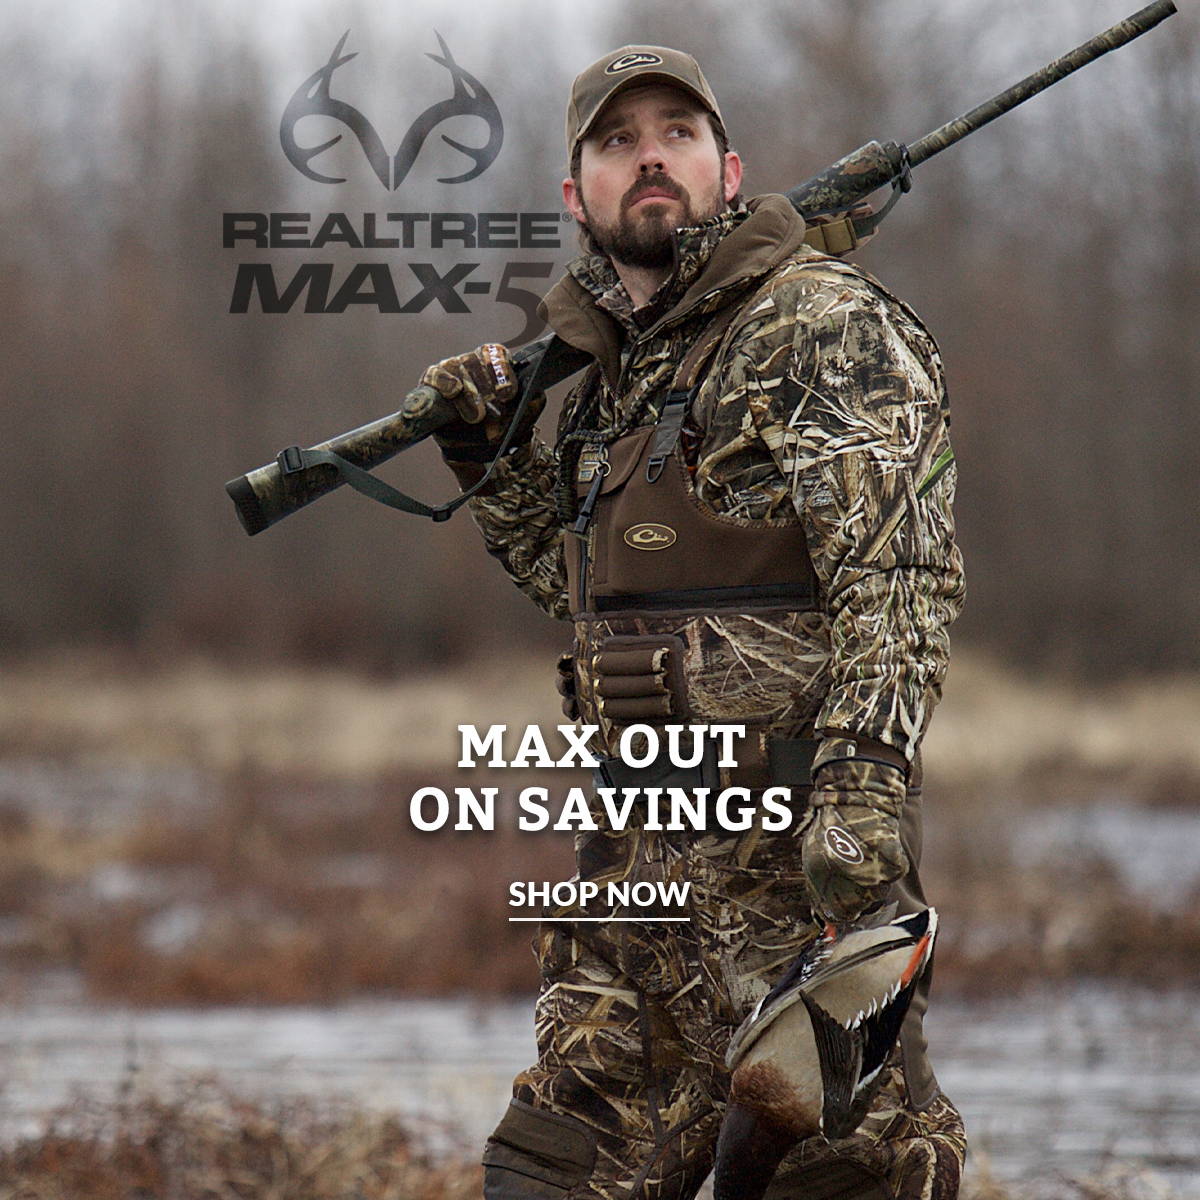 https://www.drakewaterfowl.com/collections/max-5-sale